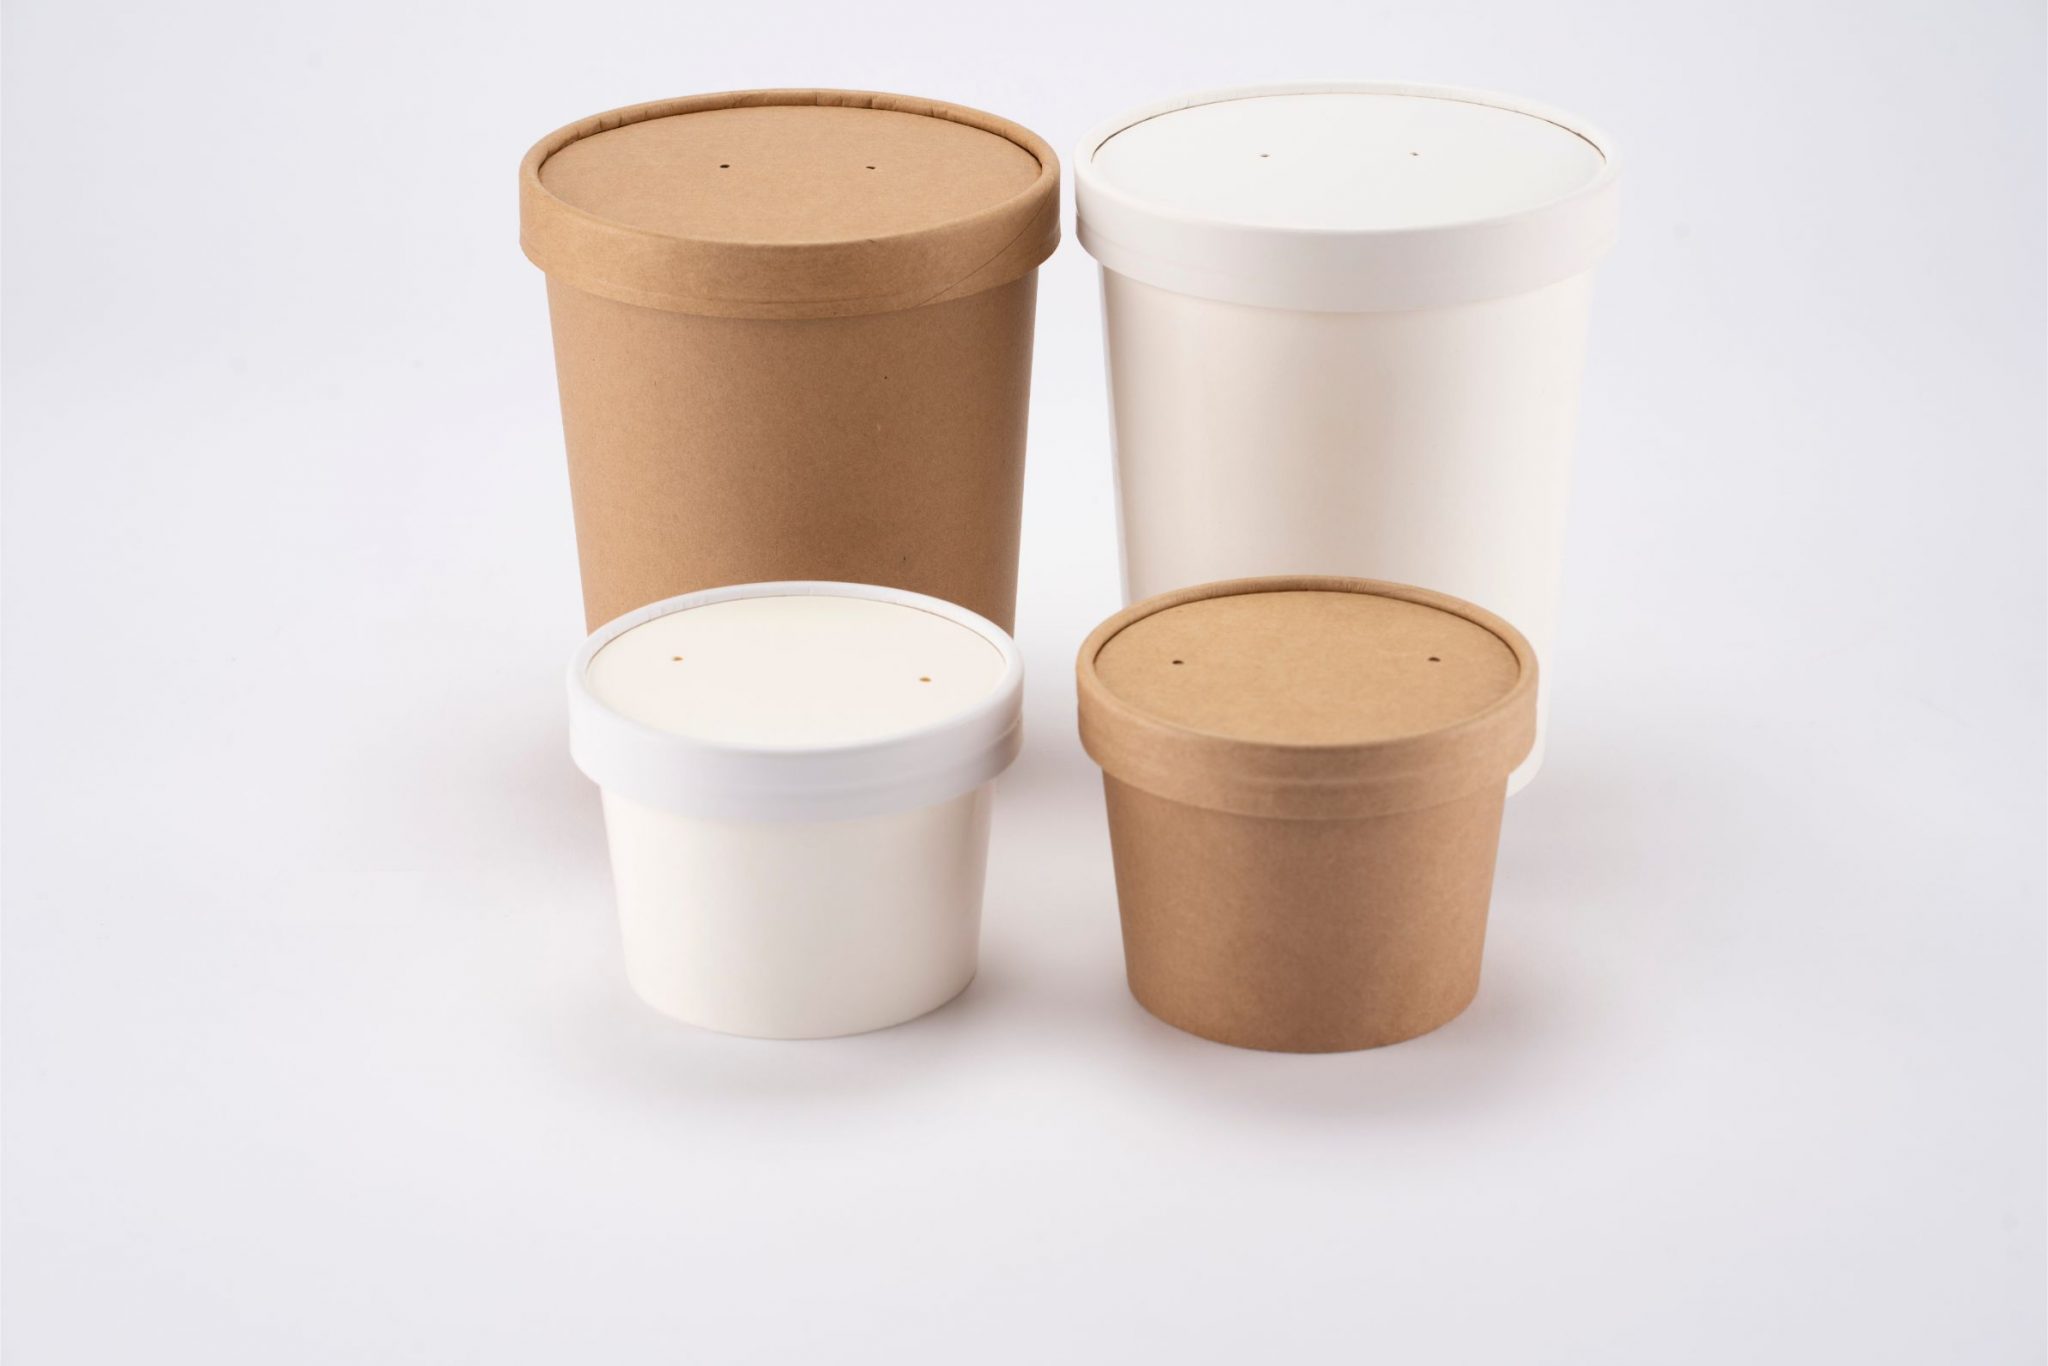 Kari-Out's Paper Soup Cups